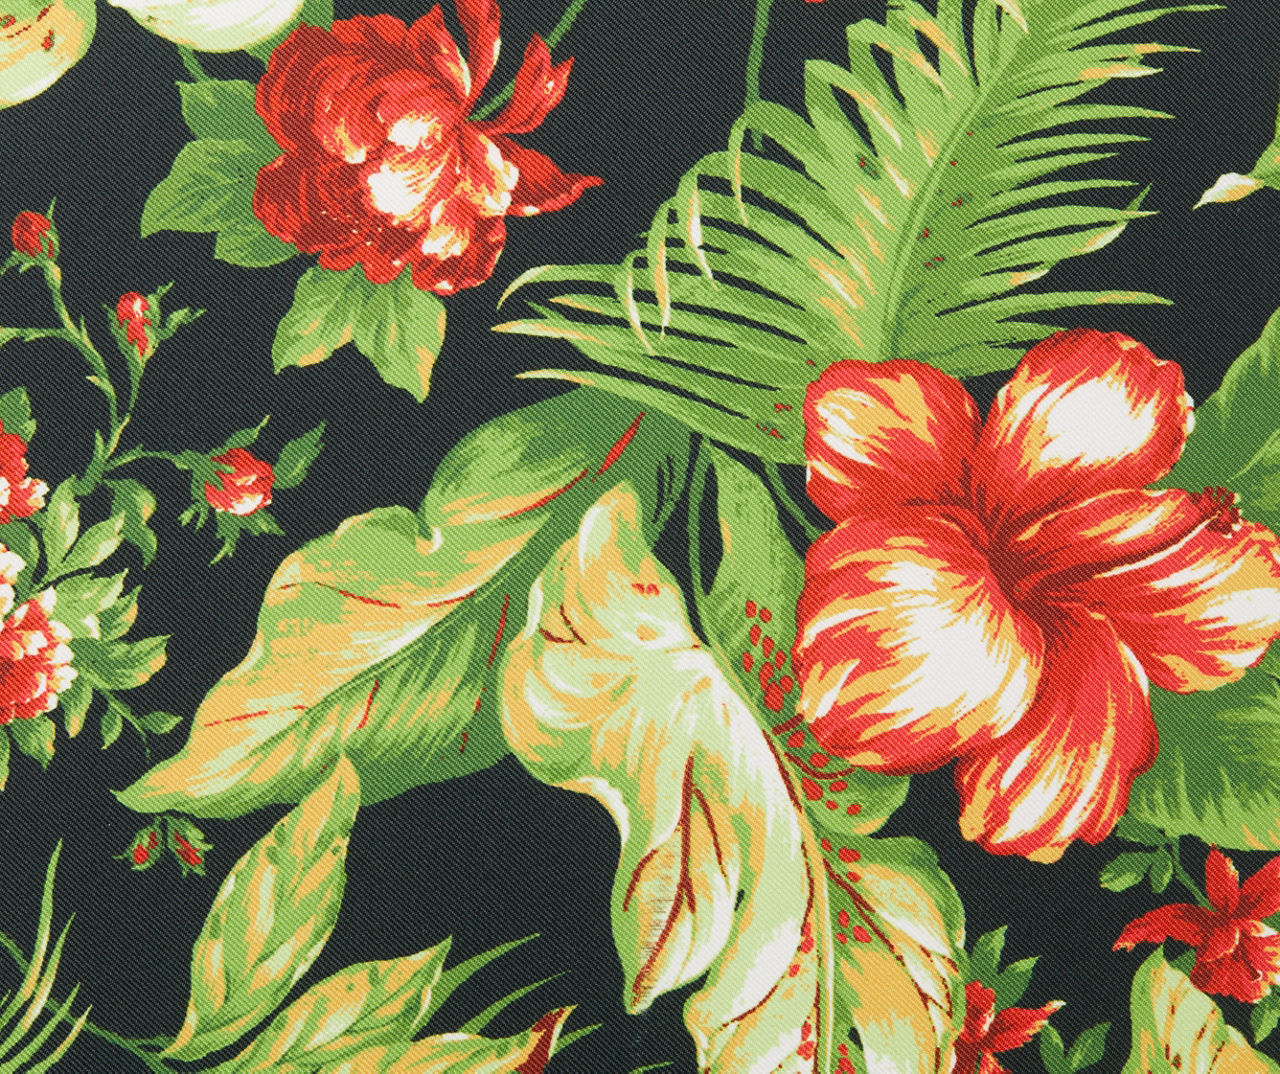 Black & Red Tropical Plant Reversible Outdoor Bench Pad